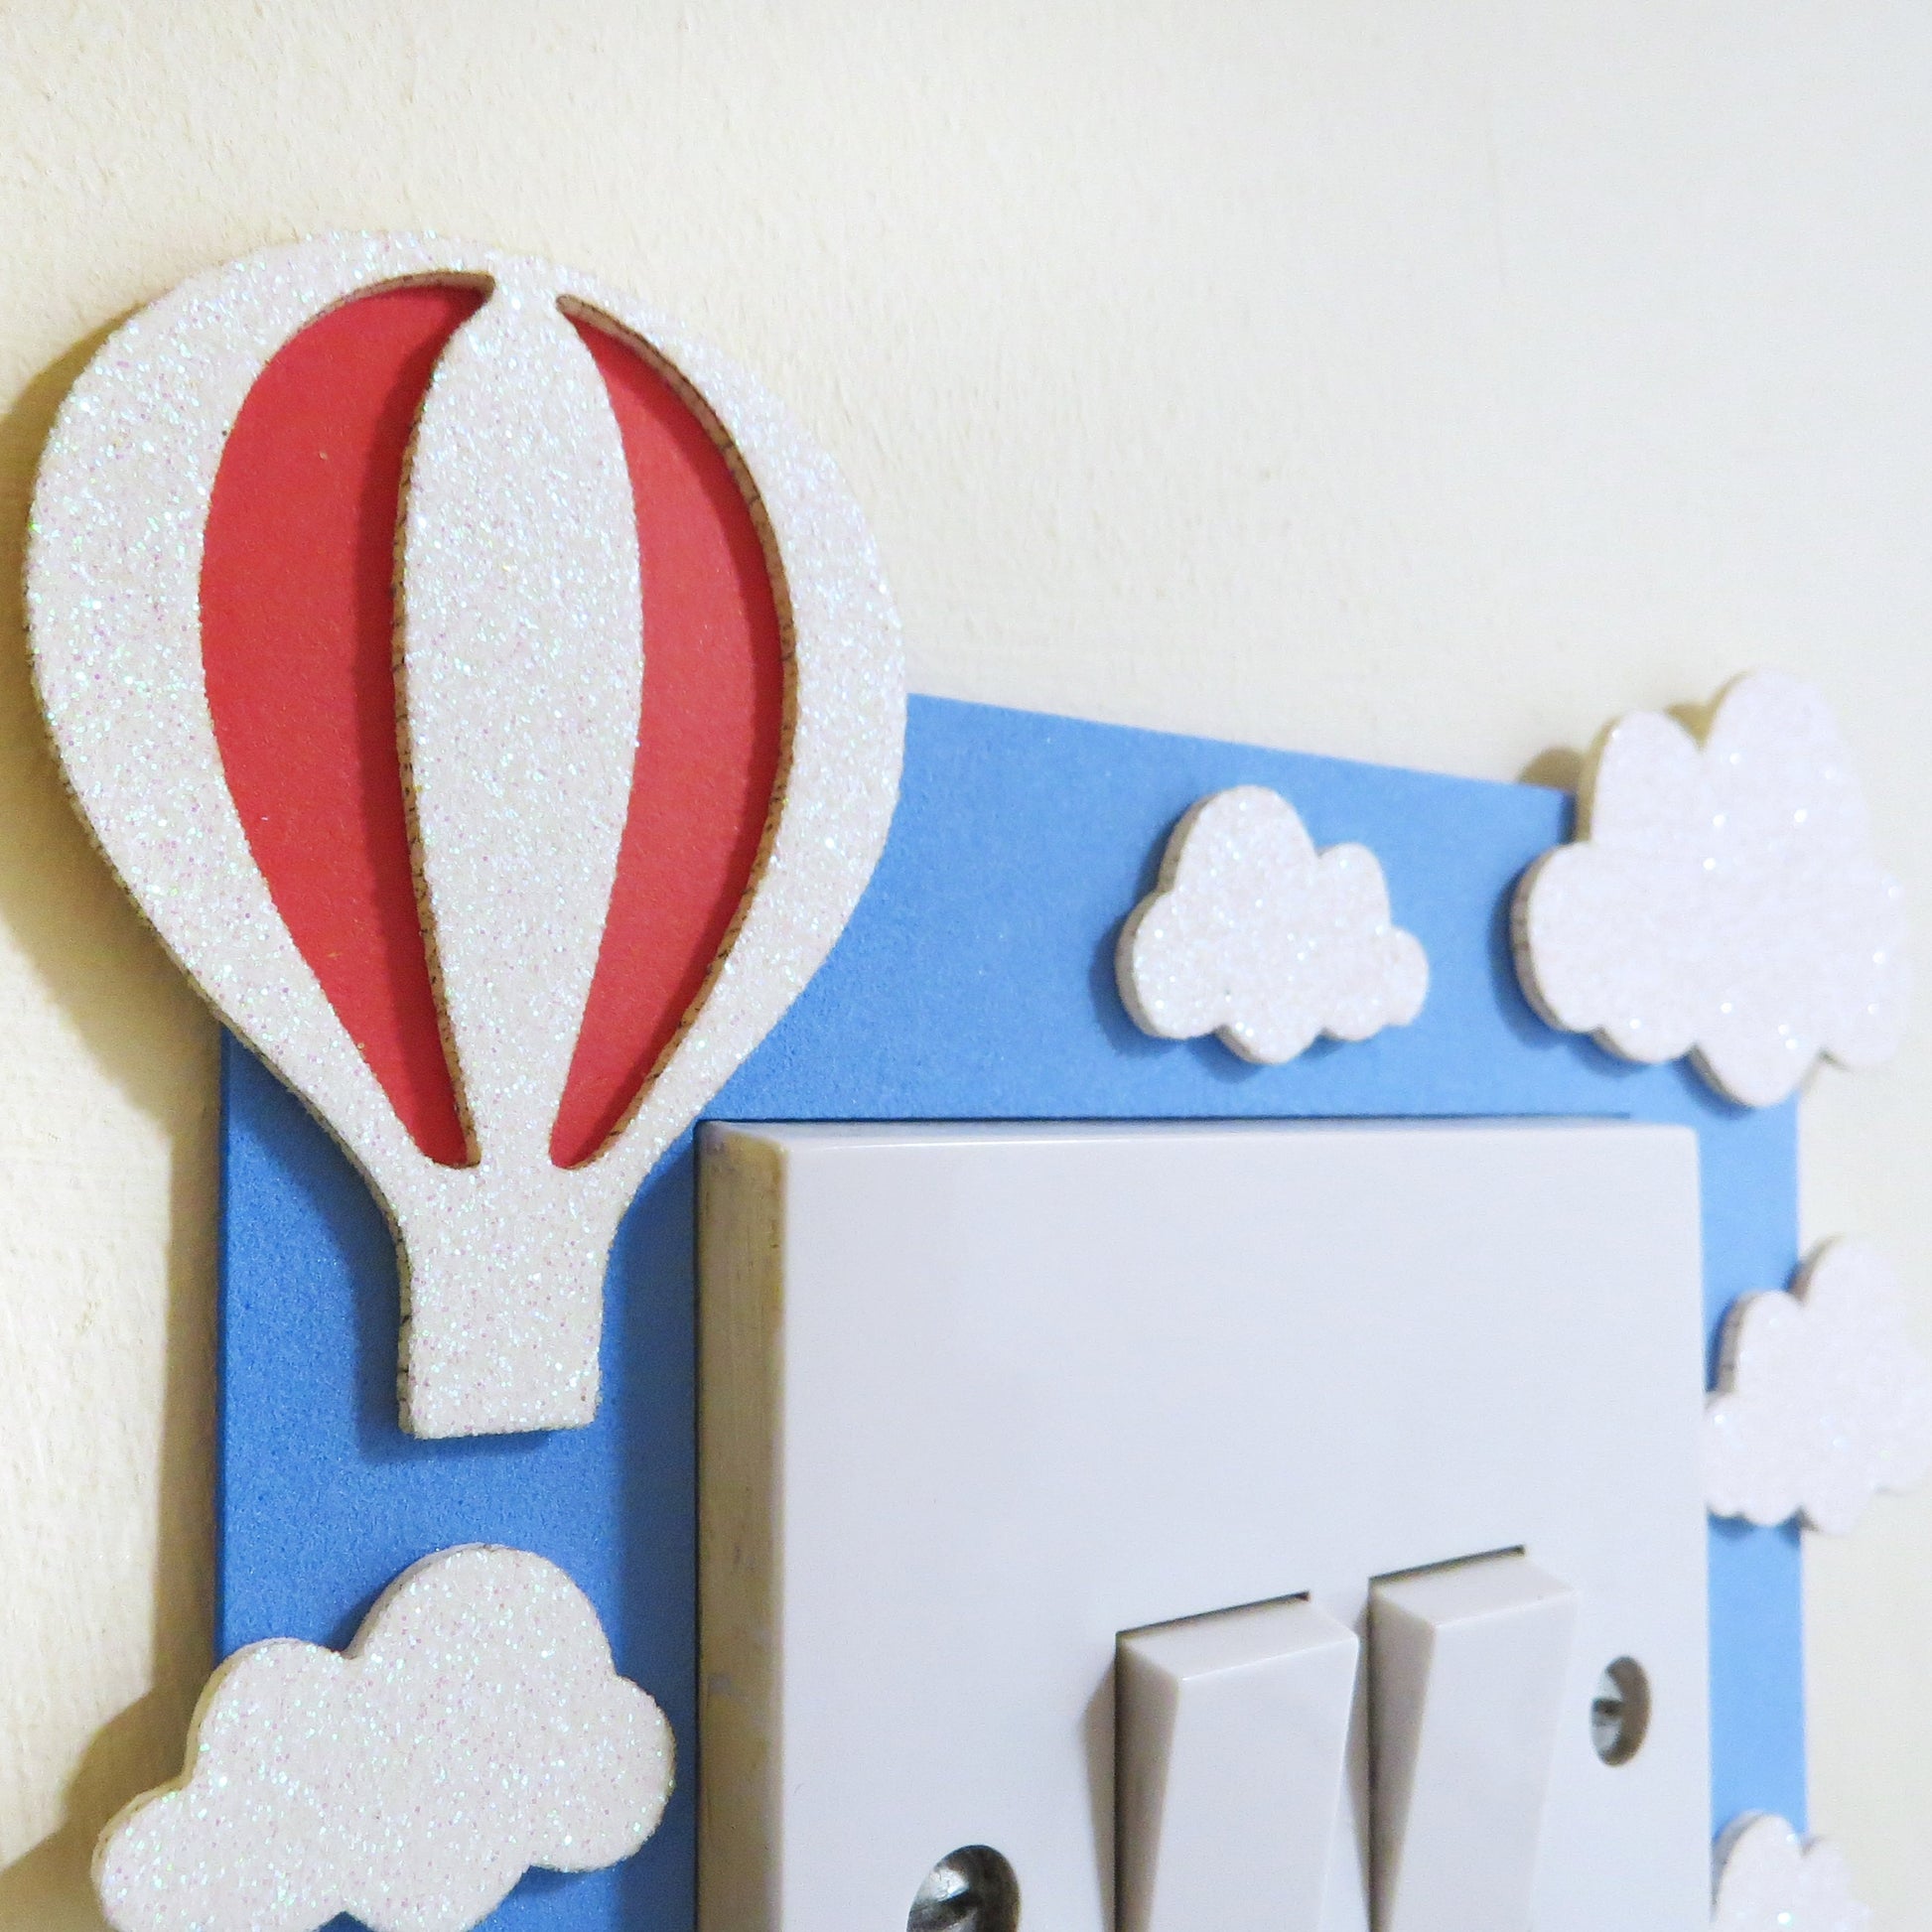 Blue foam light switch surround deigned with a hot air ballon, clouds and a custom name.